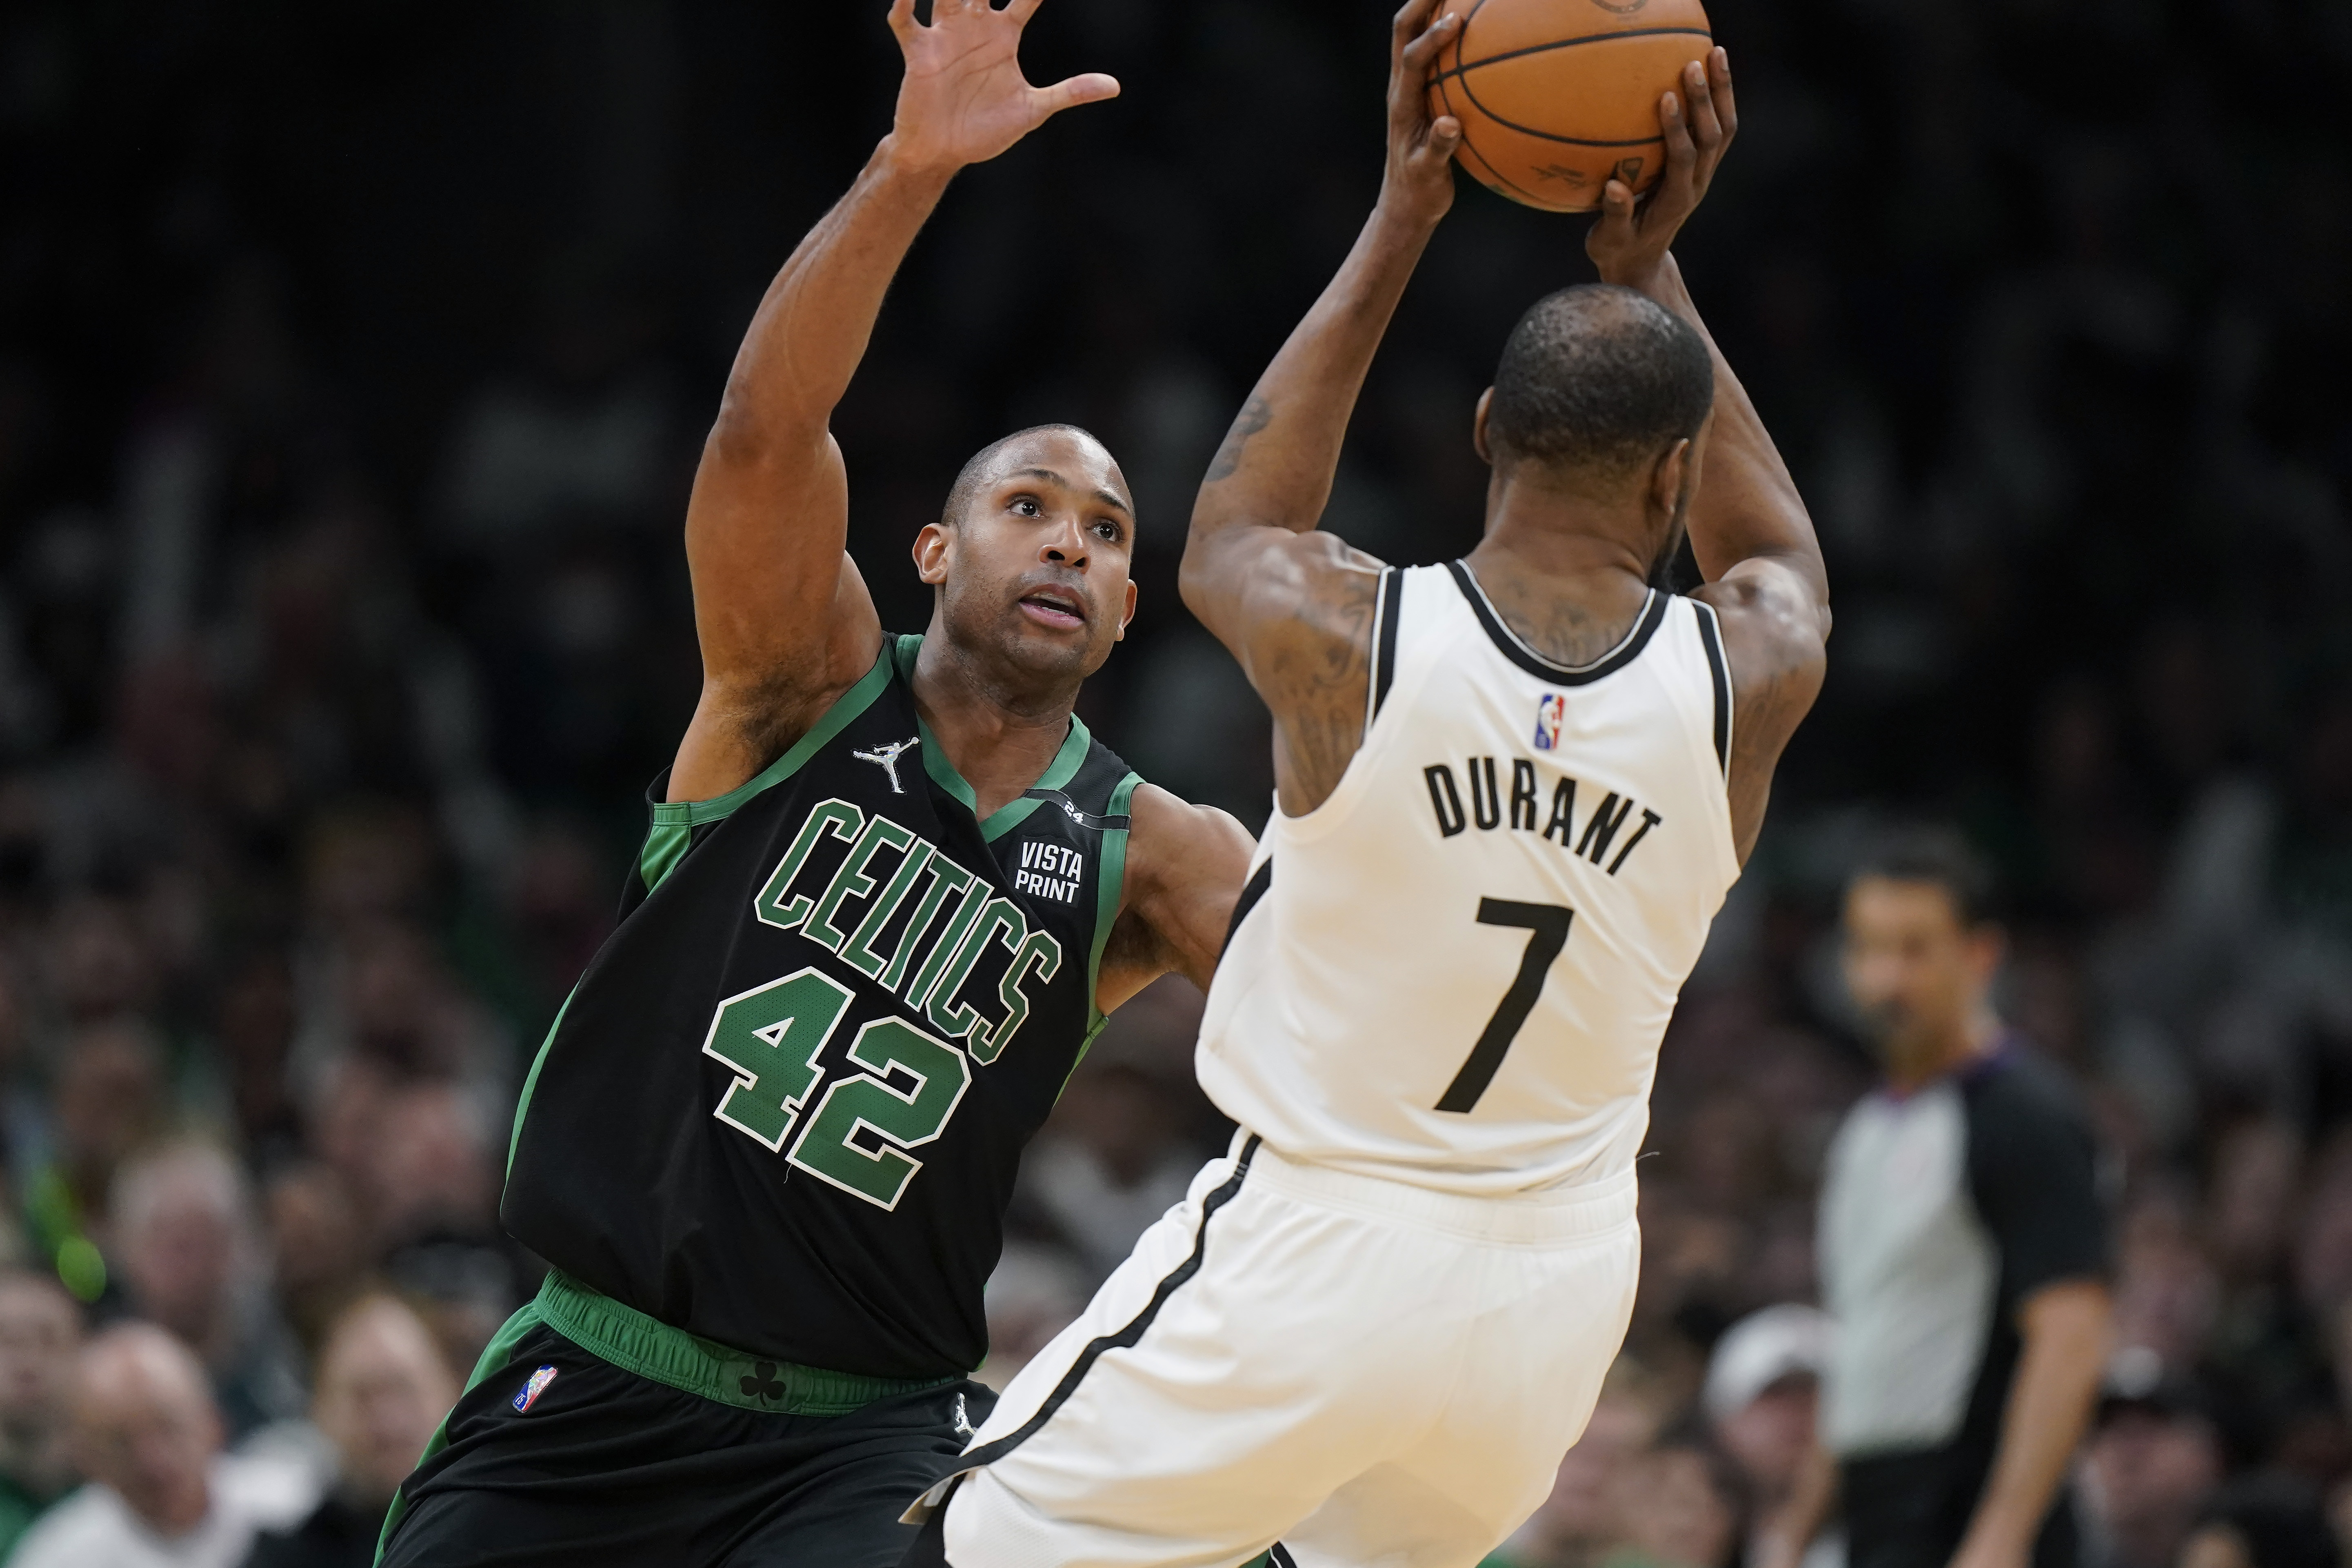 Celtics veteran Al Horford waited a long time to make it to the NBA Finals  - The Boston Globe